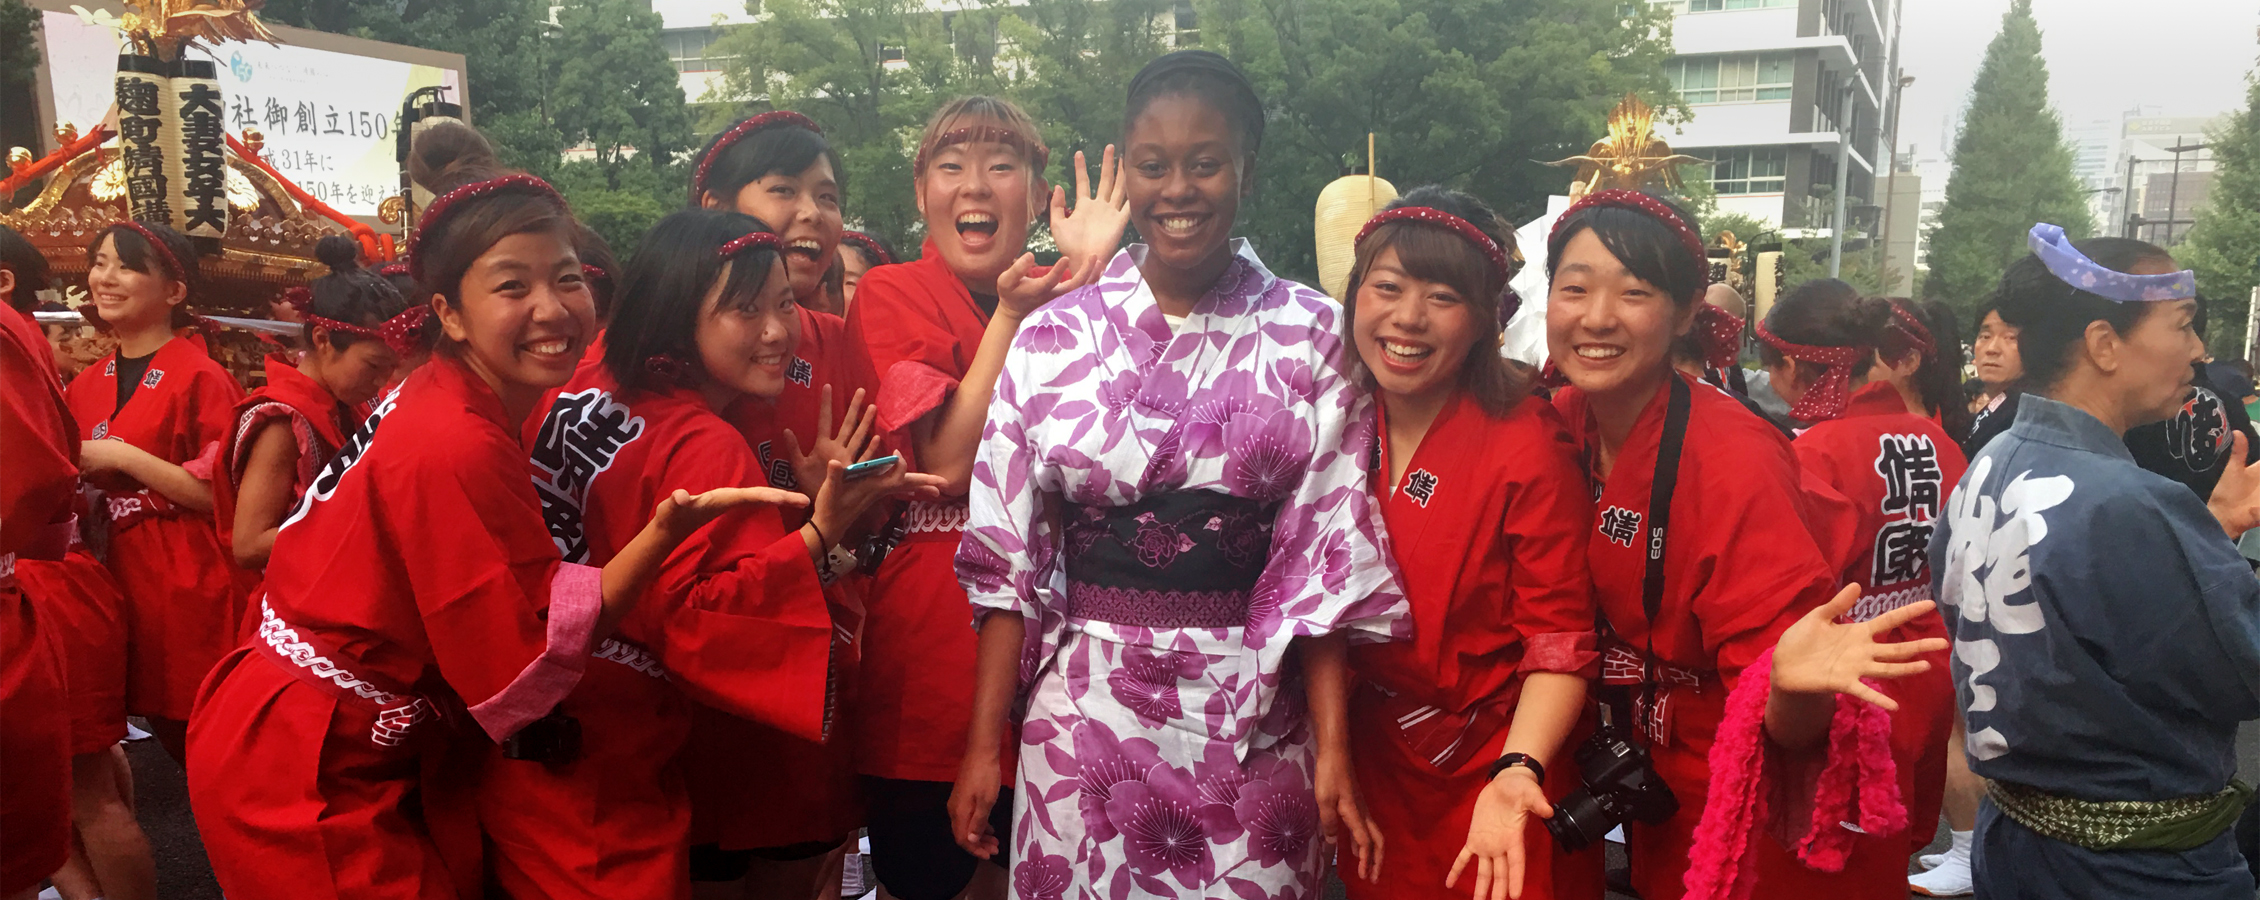 An African American female stands in a crowd of smiling people in Japan.